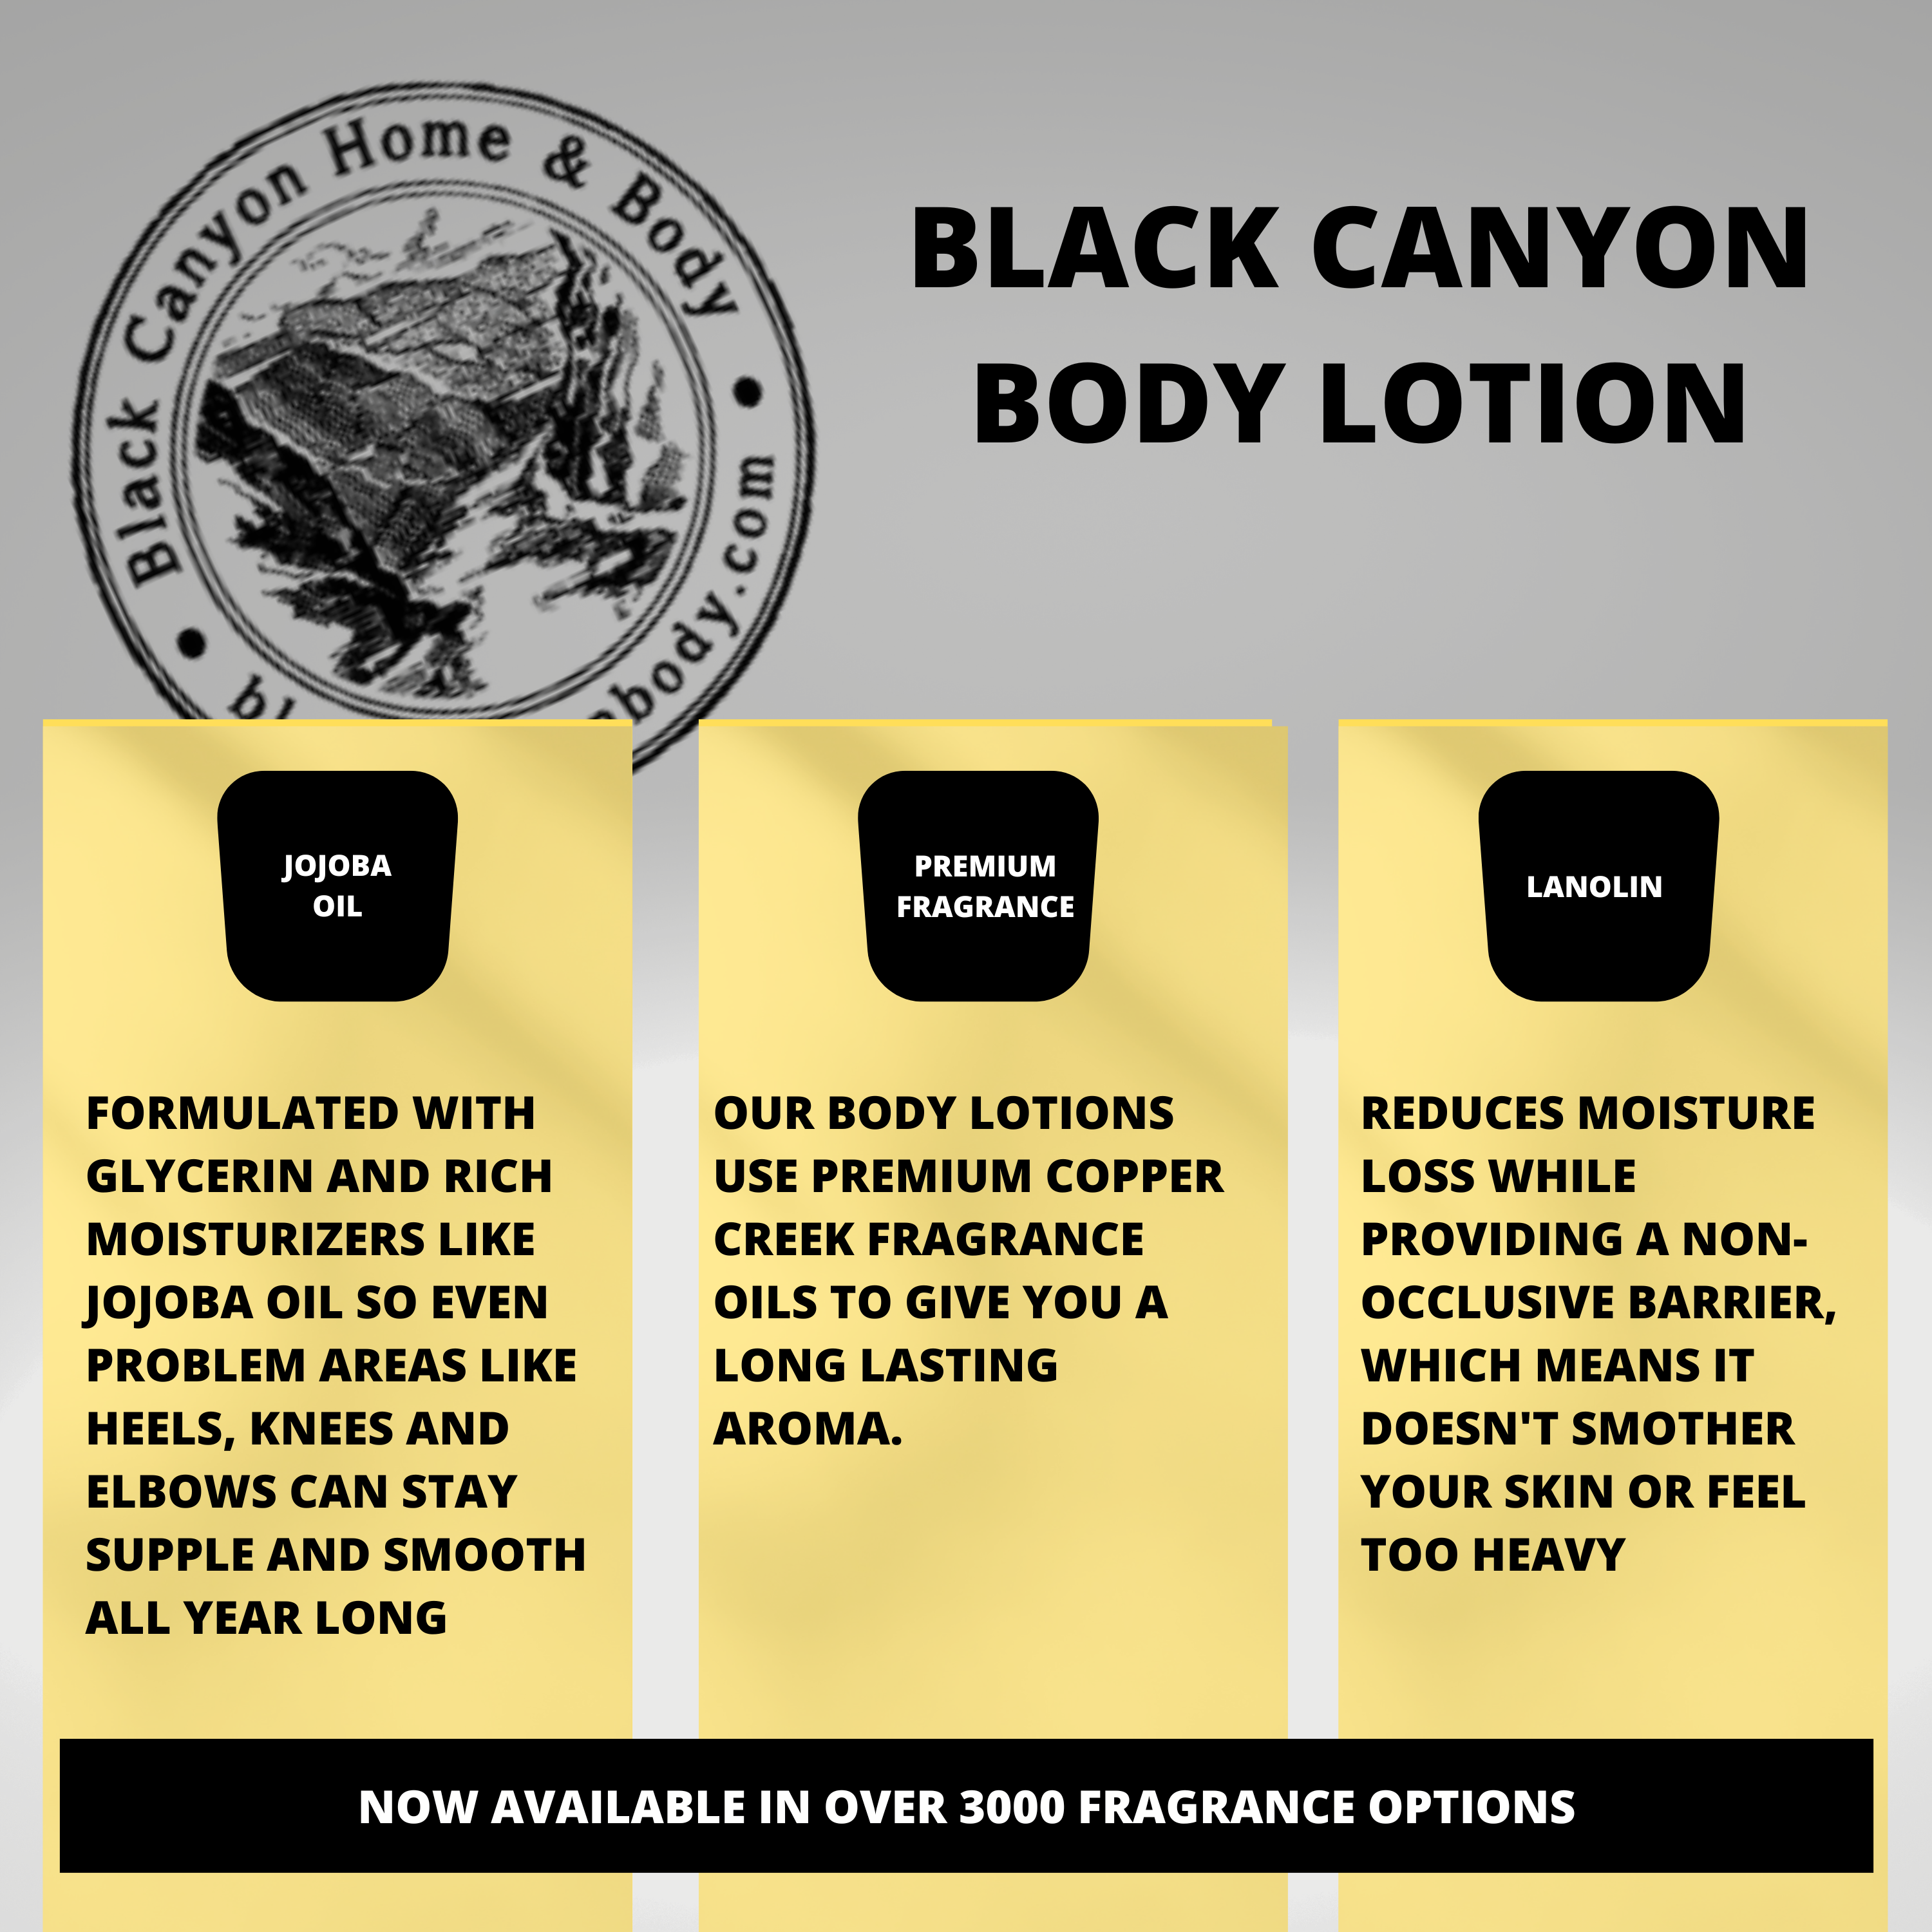 Black Canyon Cranberry & Clementine Scented Luxury Body Lotion with Lanolin and Jojoba Oil